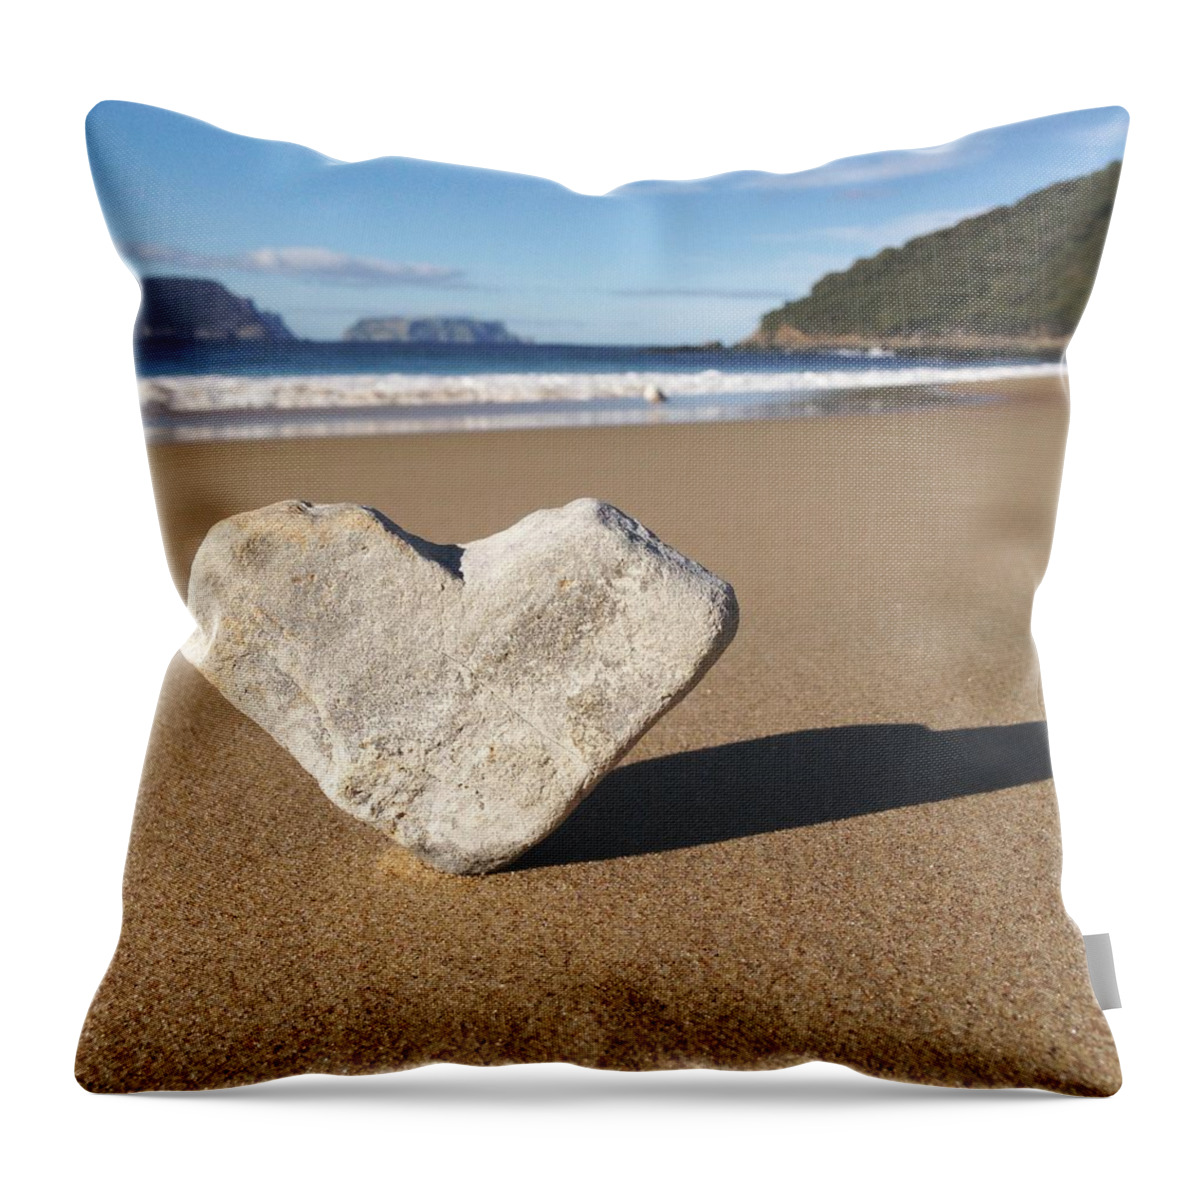 Water's Edge Throw Pillow featuring the photograph Heart Shaped Rock Sitting In Sand At by Jodie Griggs